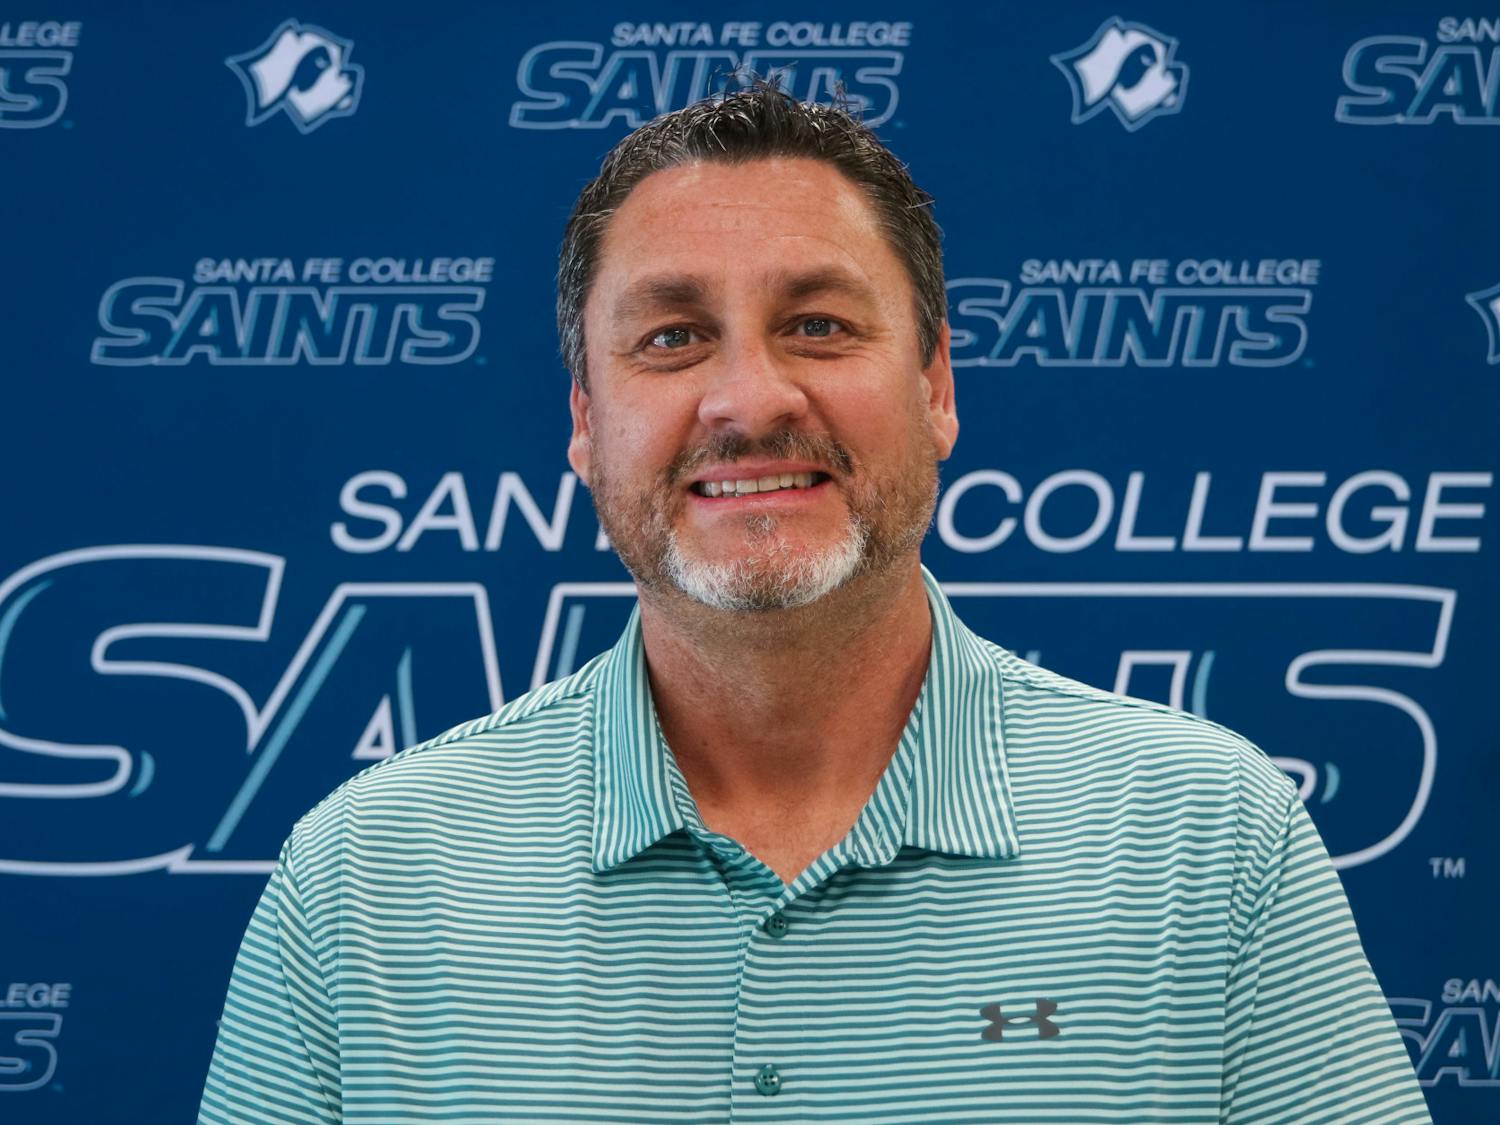 Santa Fe College's new athletic director, Greg McVey, 51, poses inside the school’s gym on Tuesday, June 1, 2021. McVey, who hails from the Midwest, said he's looking forward to working with "great people" and "great student athletes.